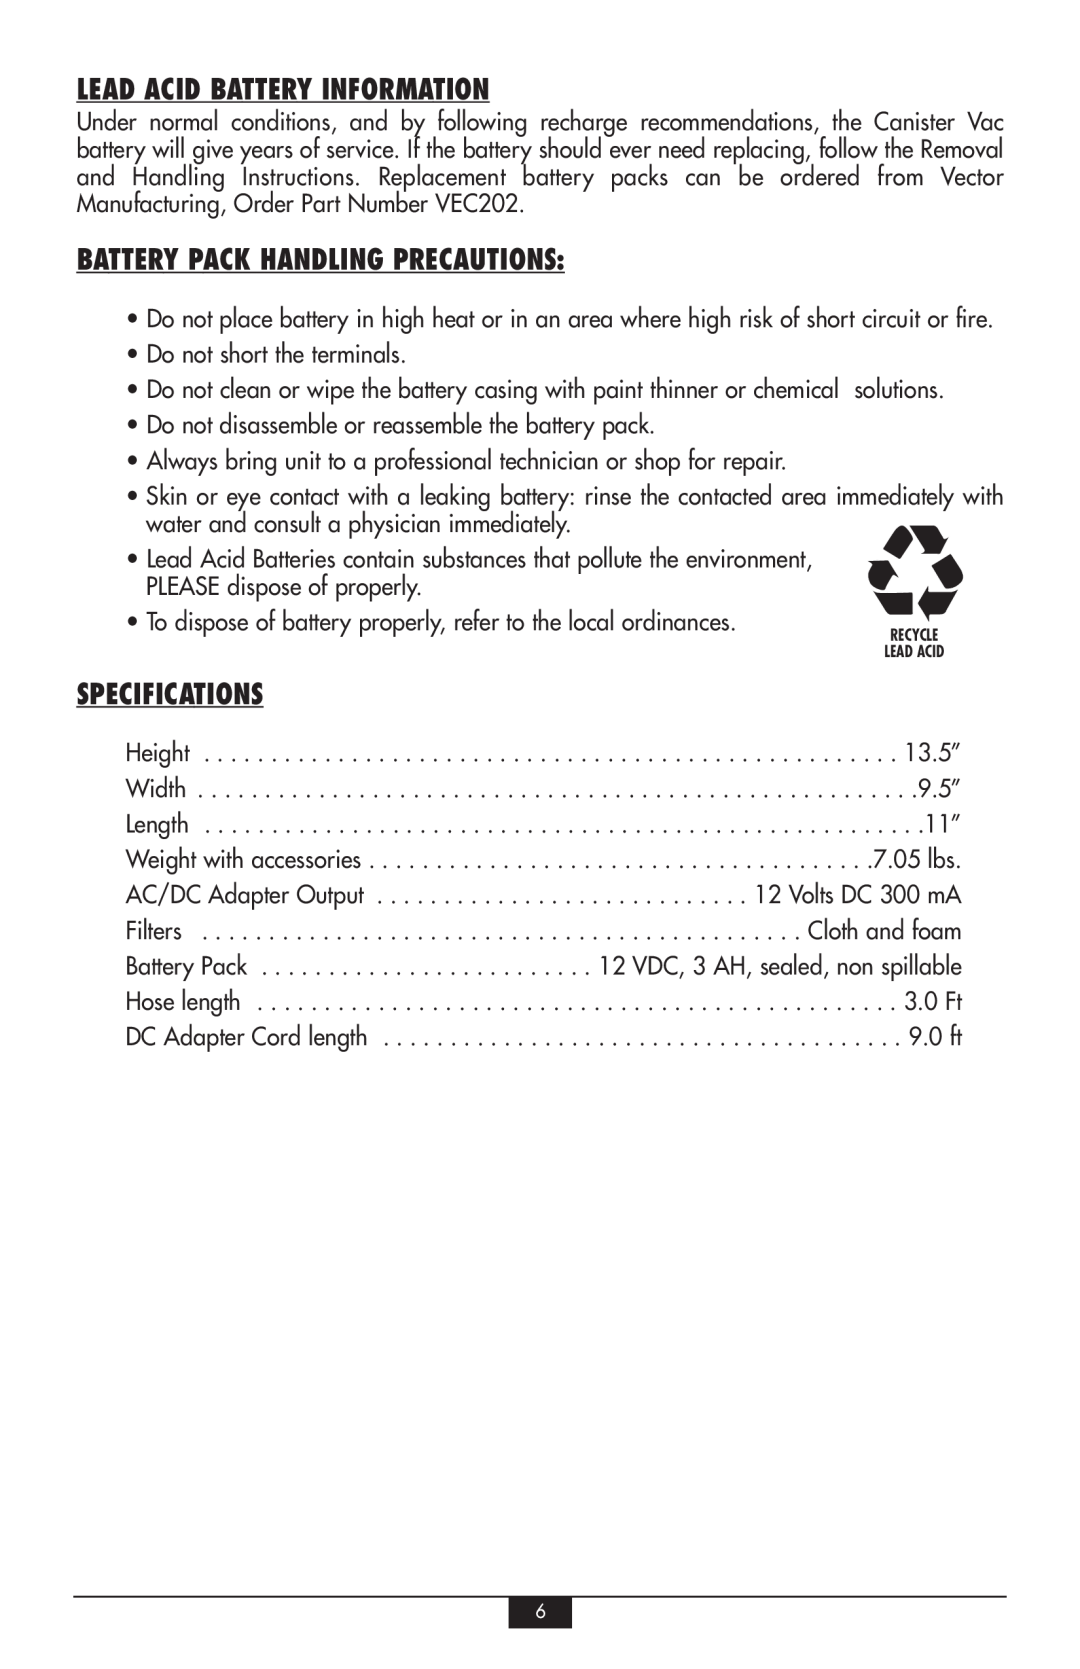 Vector VEC248 owner manual Lead Acid Battery Information, Battery Pack Handling Precautions, Specifications 